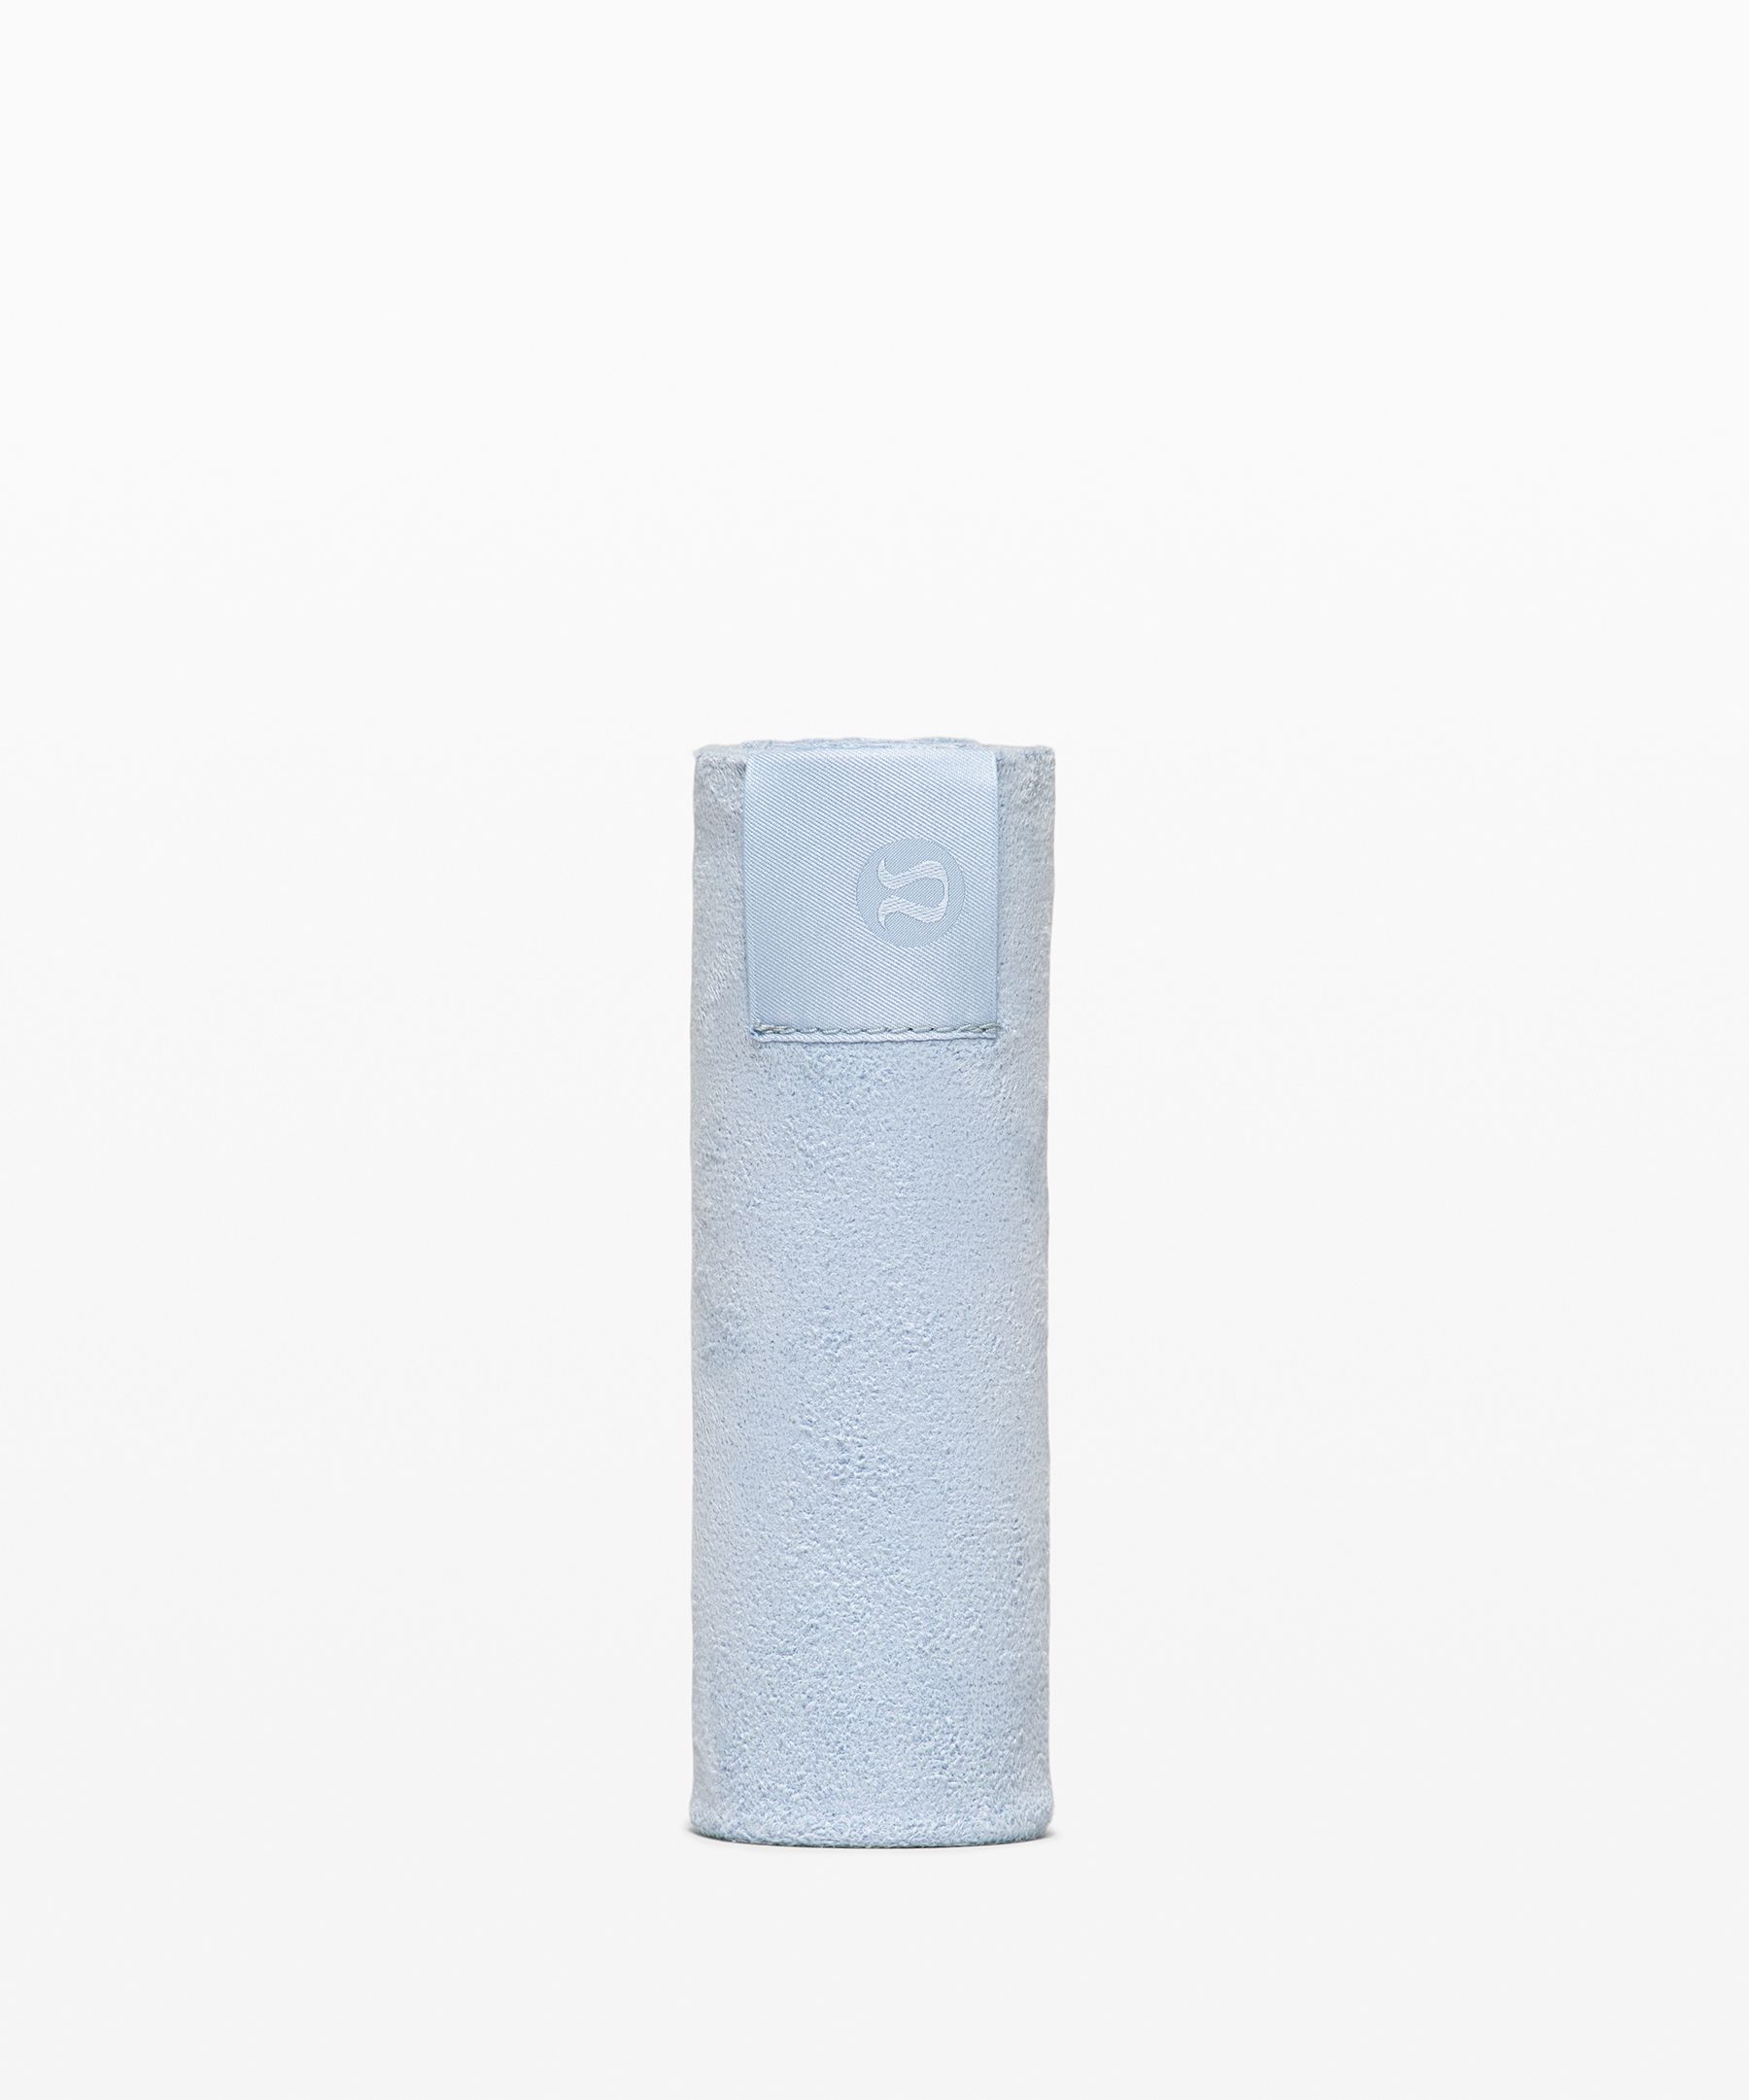 Lululemon The Small Towel In Blue Linen